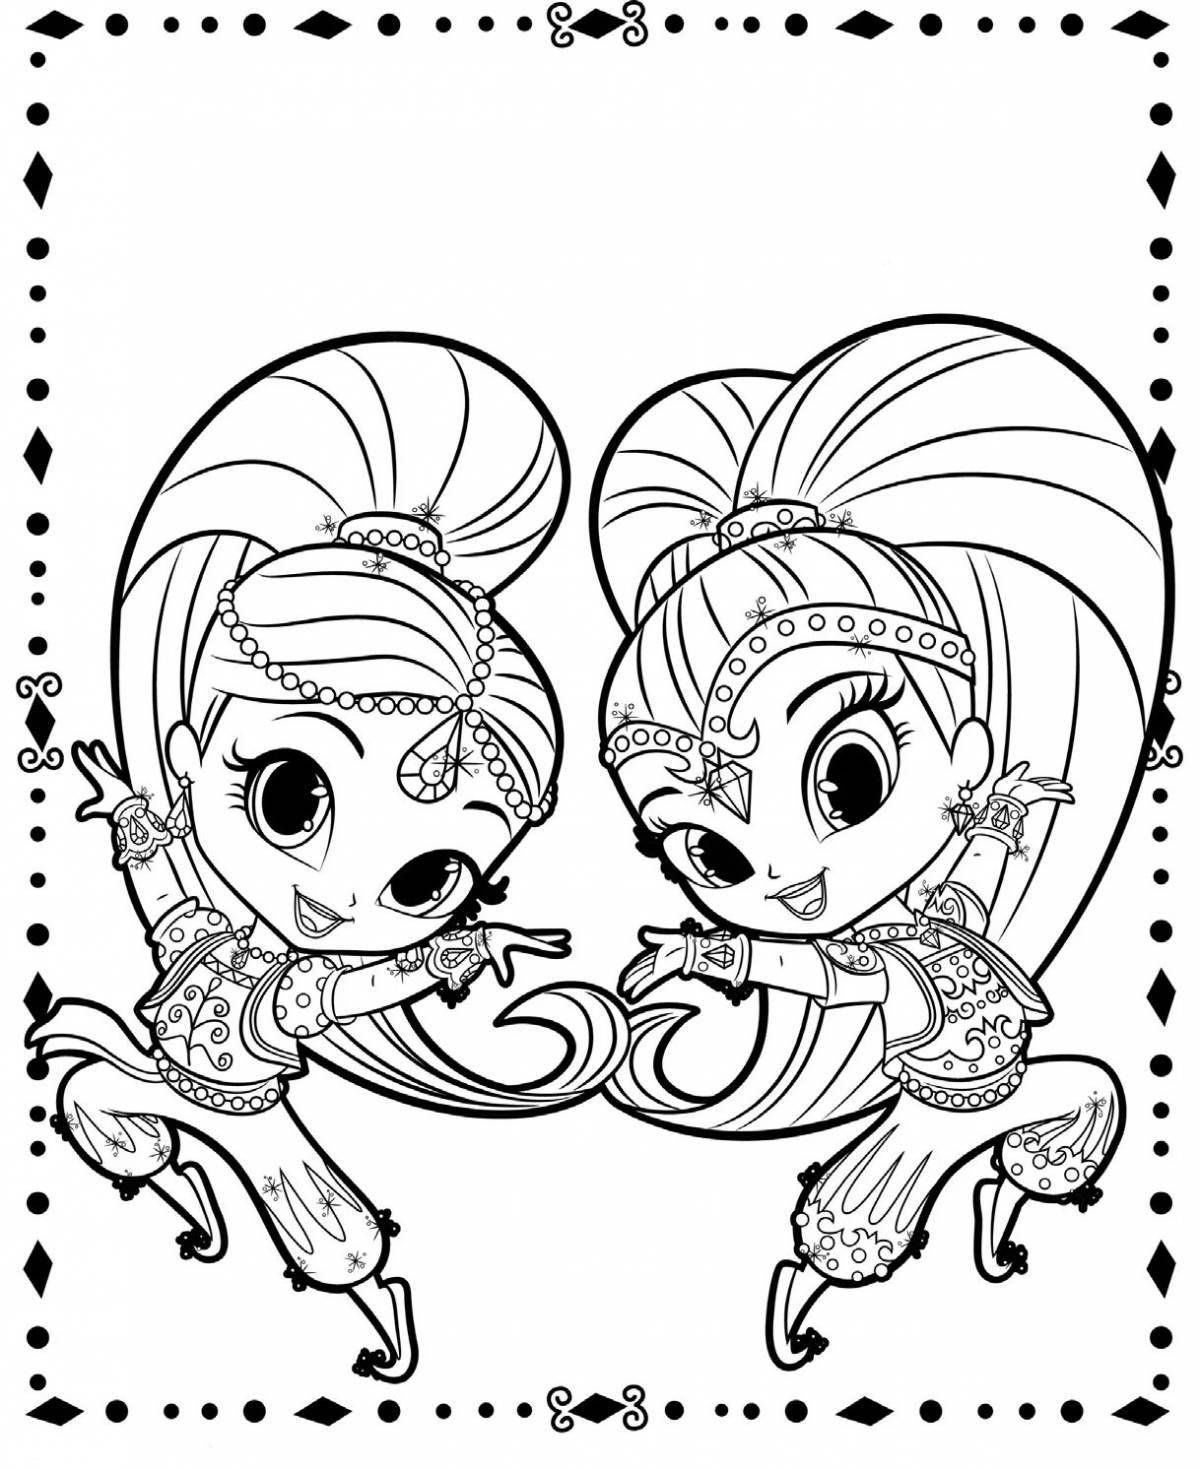 Children's coloring book shimmer and shine